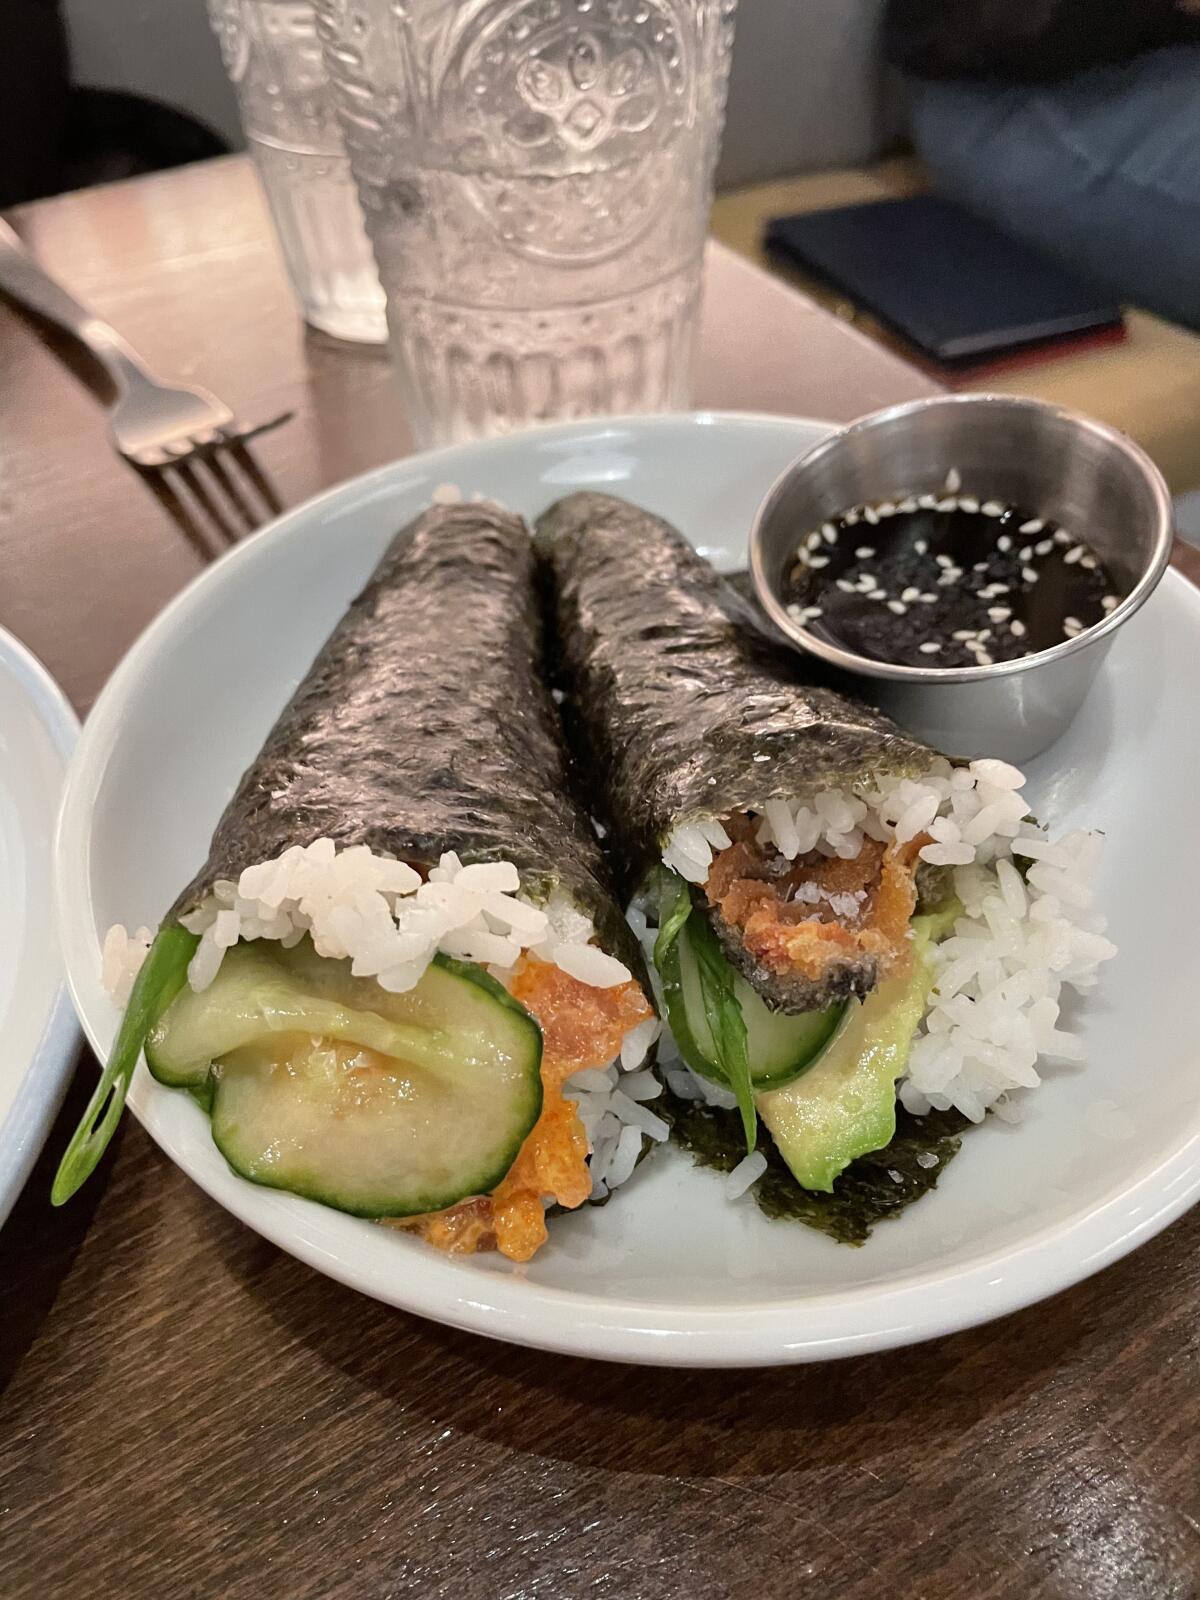 The crisp hand rolls at O SEA are fun to eat, especially the one stuffed with salmon “chicharrones.”